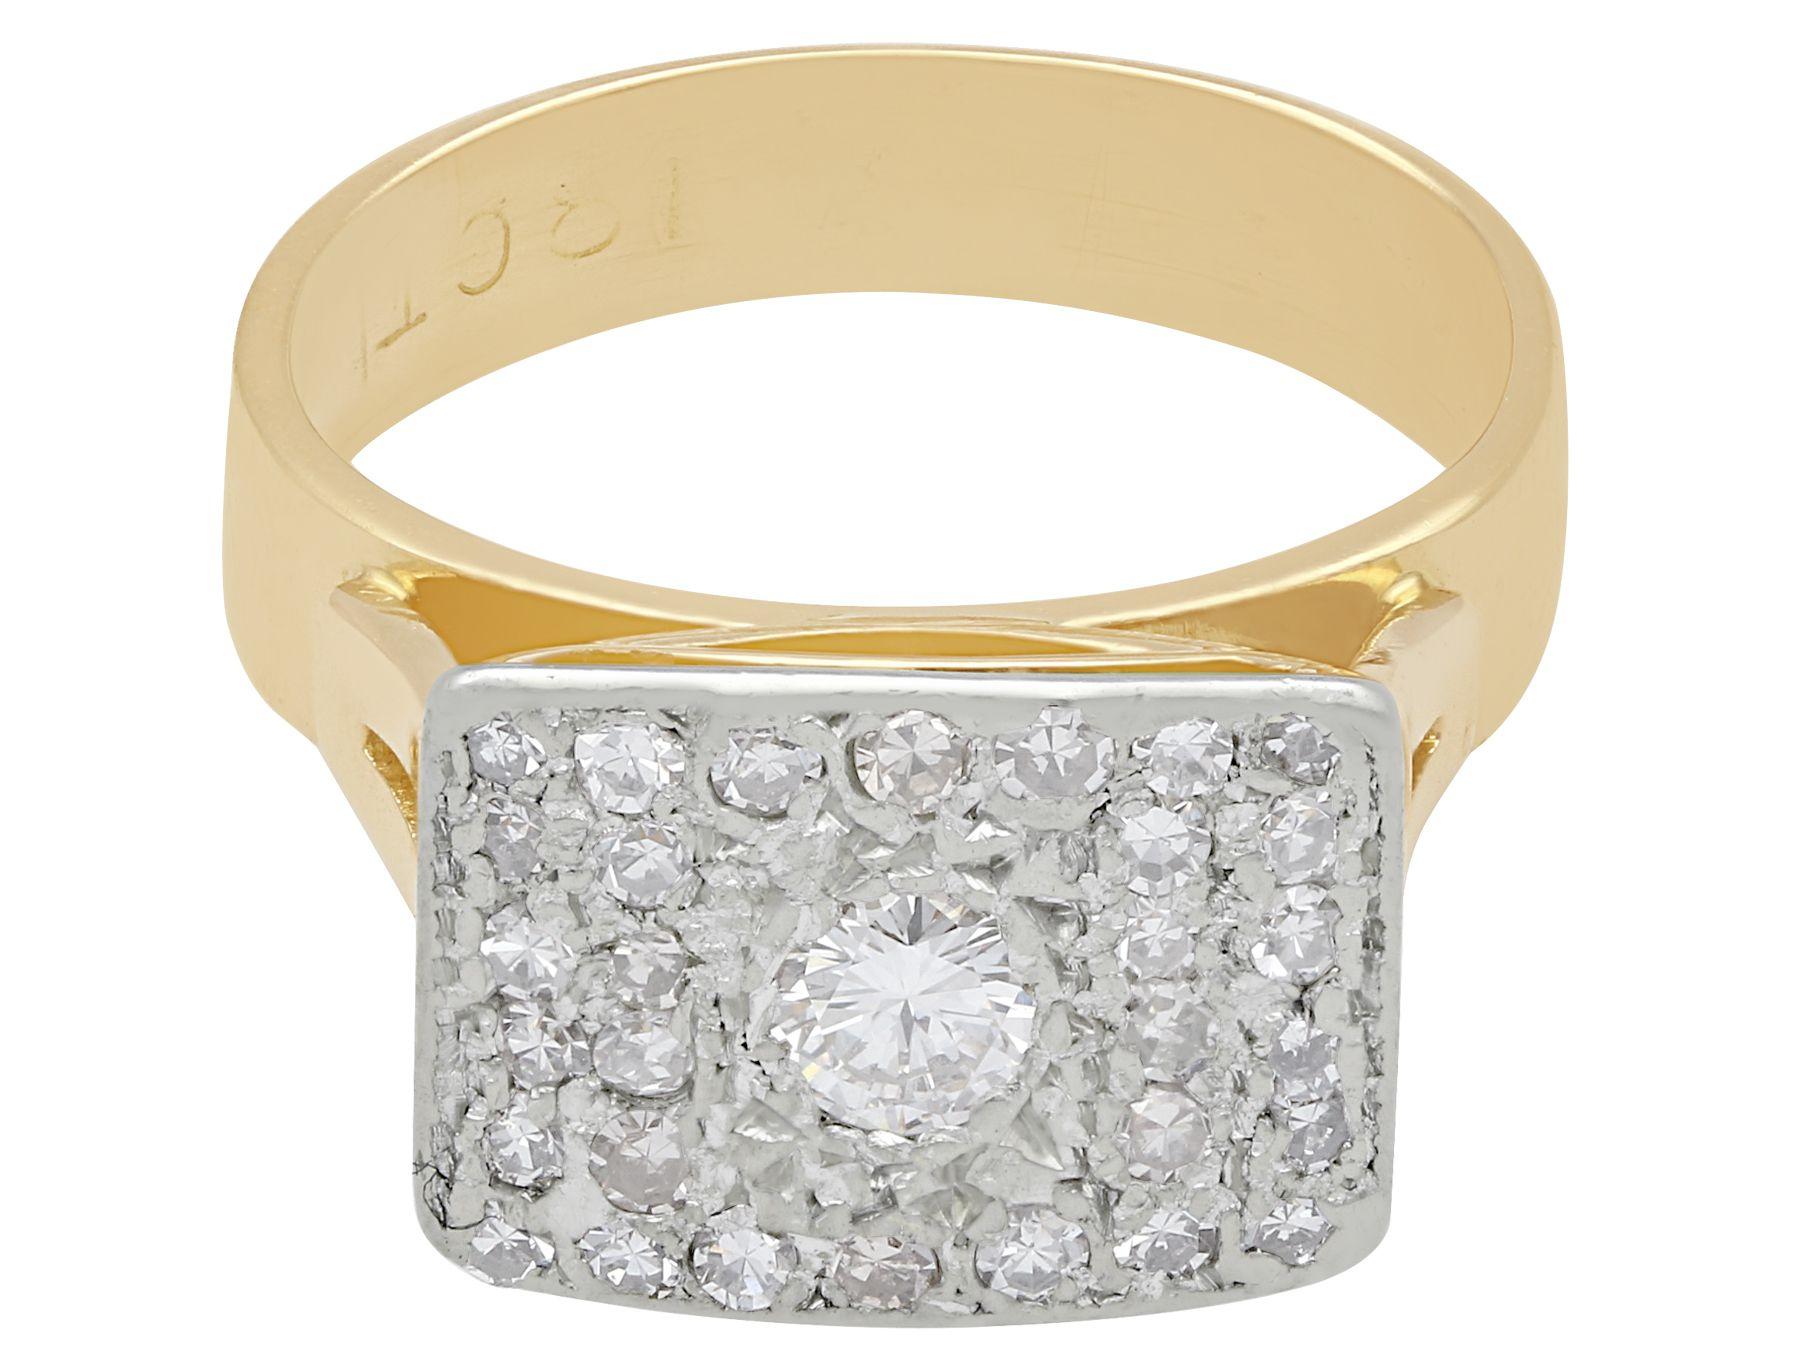 Art Deco 1950s, 1.06 Carat Diamond and Gold Cocktail Ring